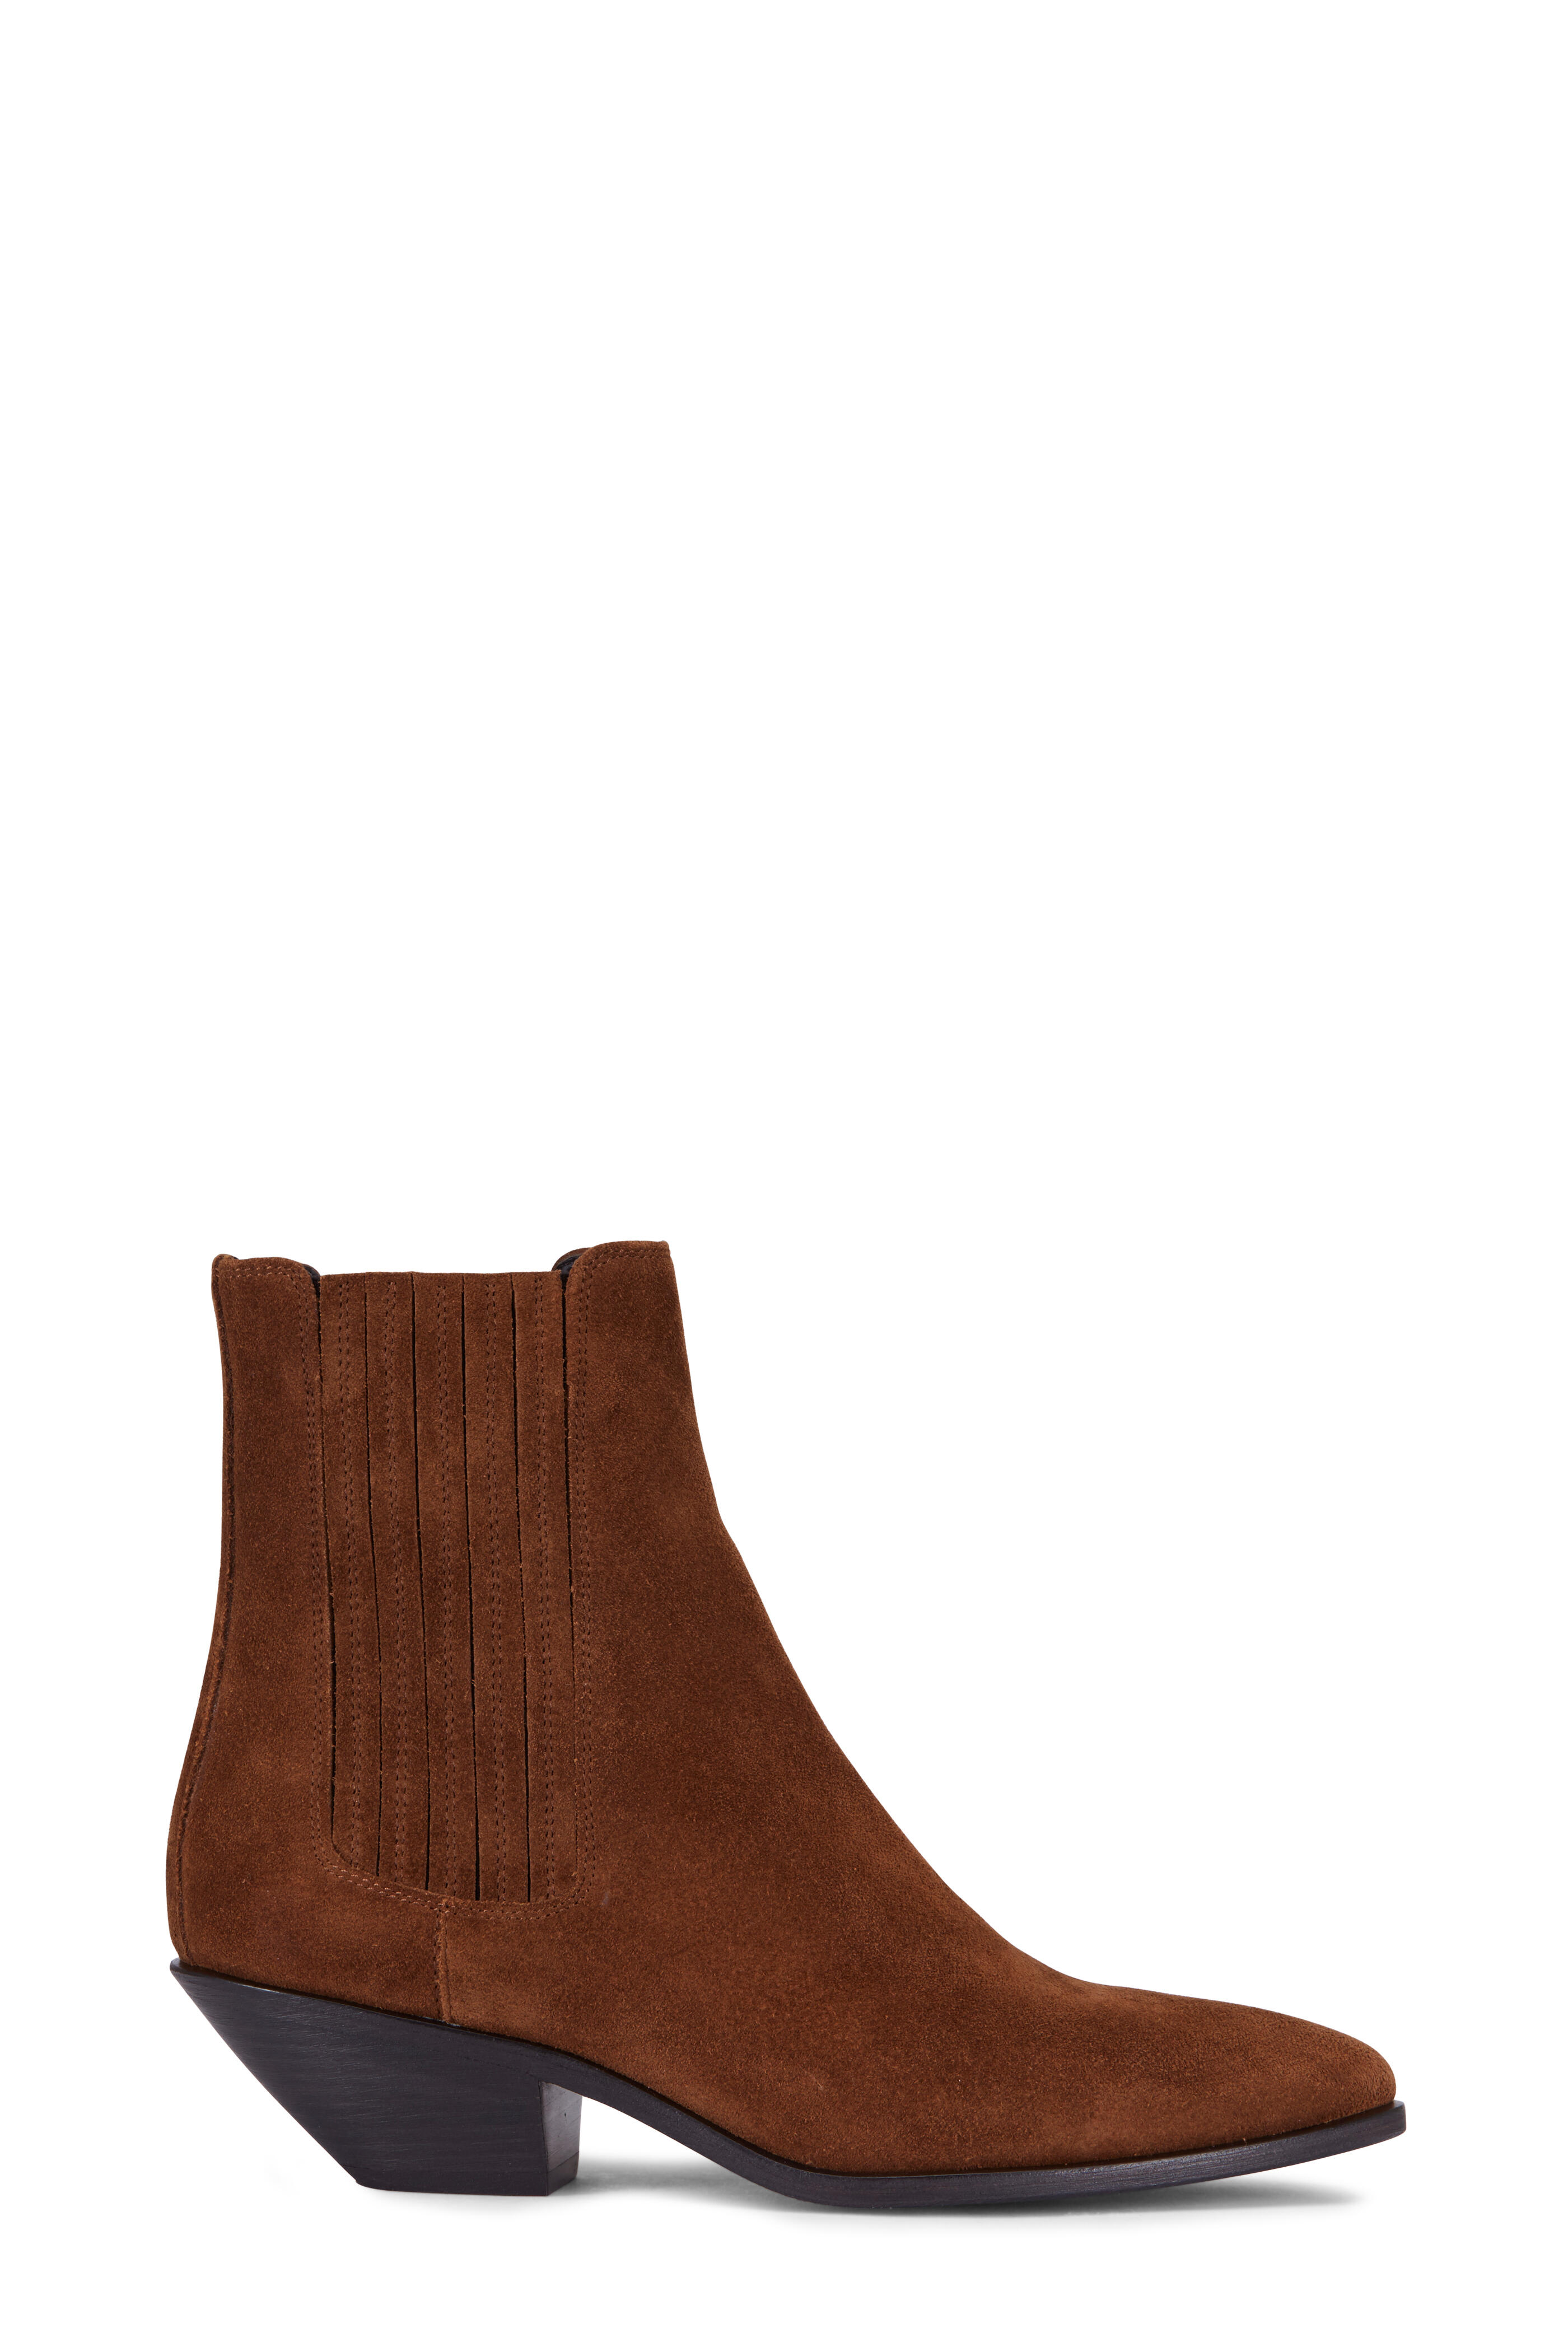 Saint Laurent - West Tan Suede Ankle Boot, 45MM | Mitchell Stores